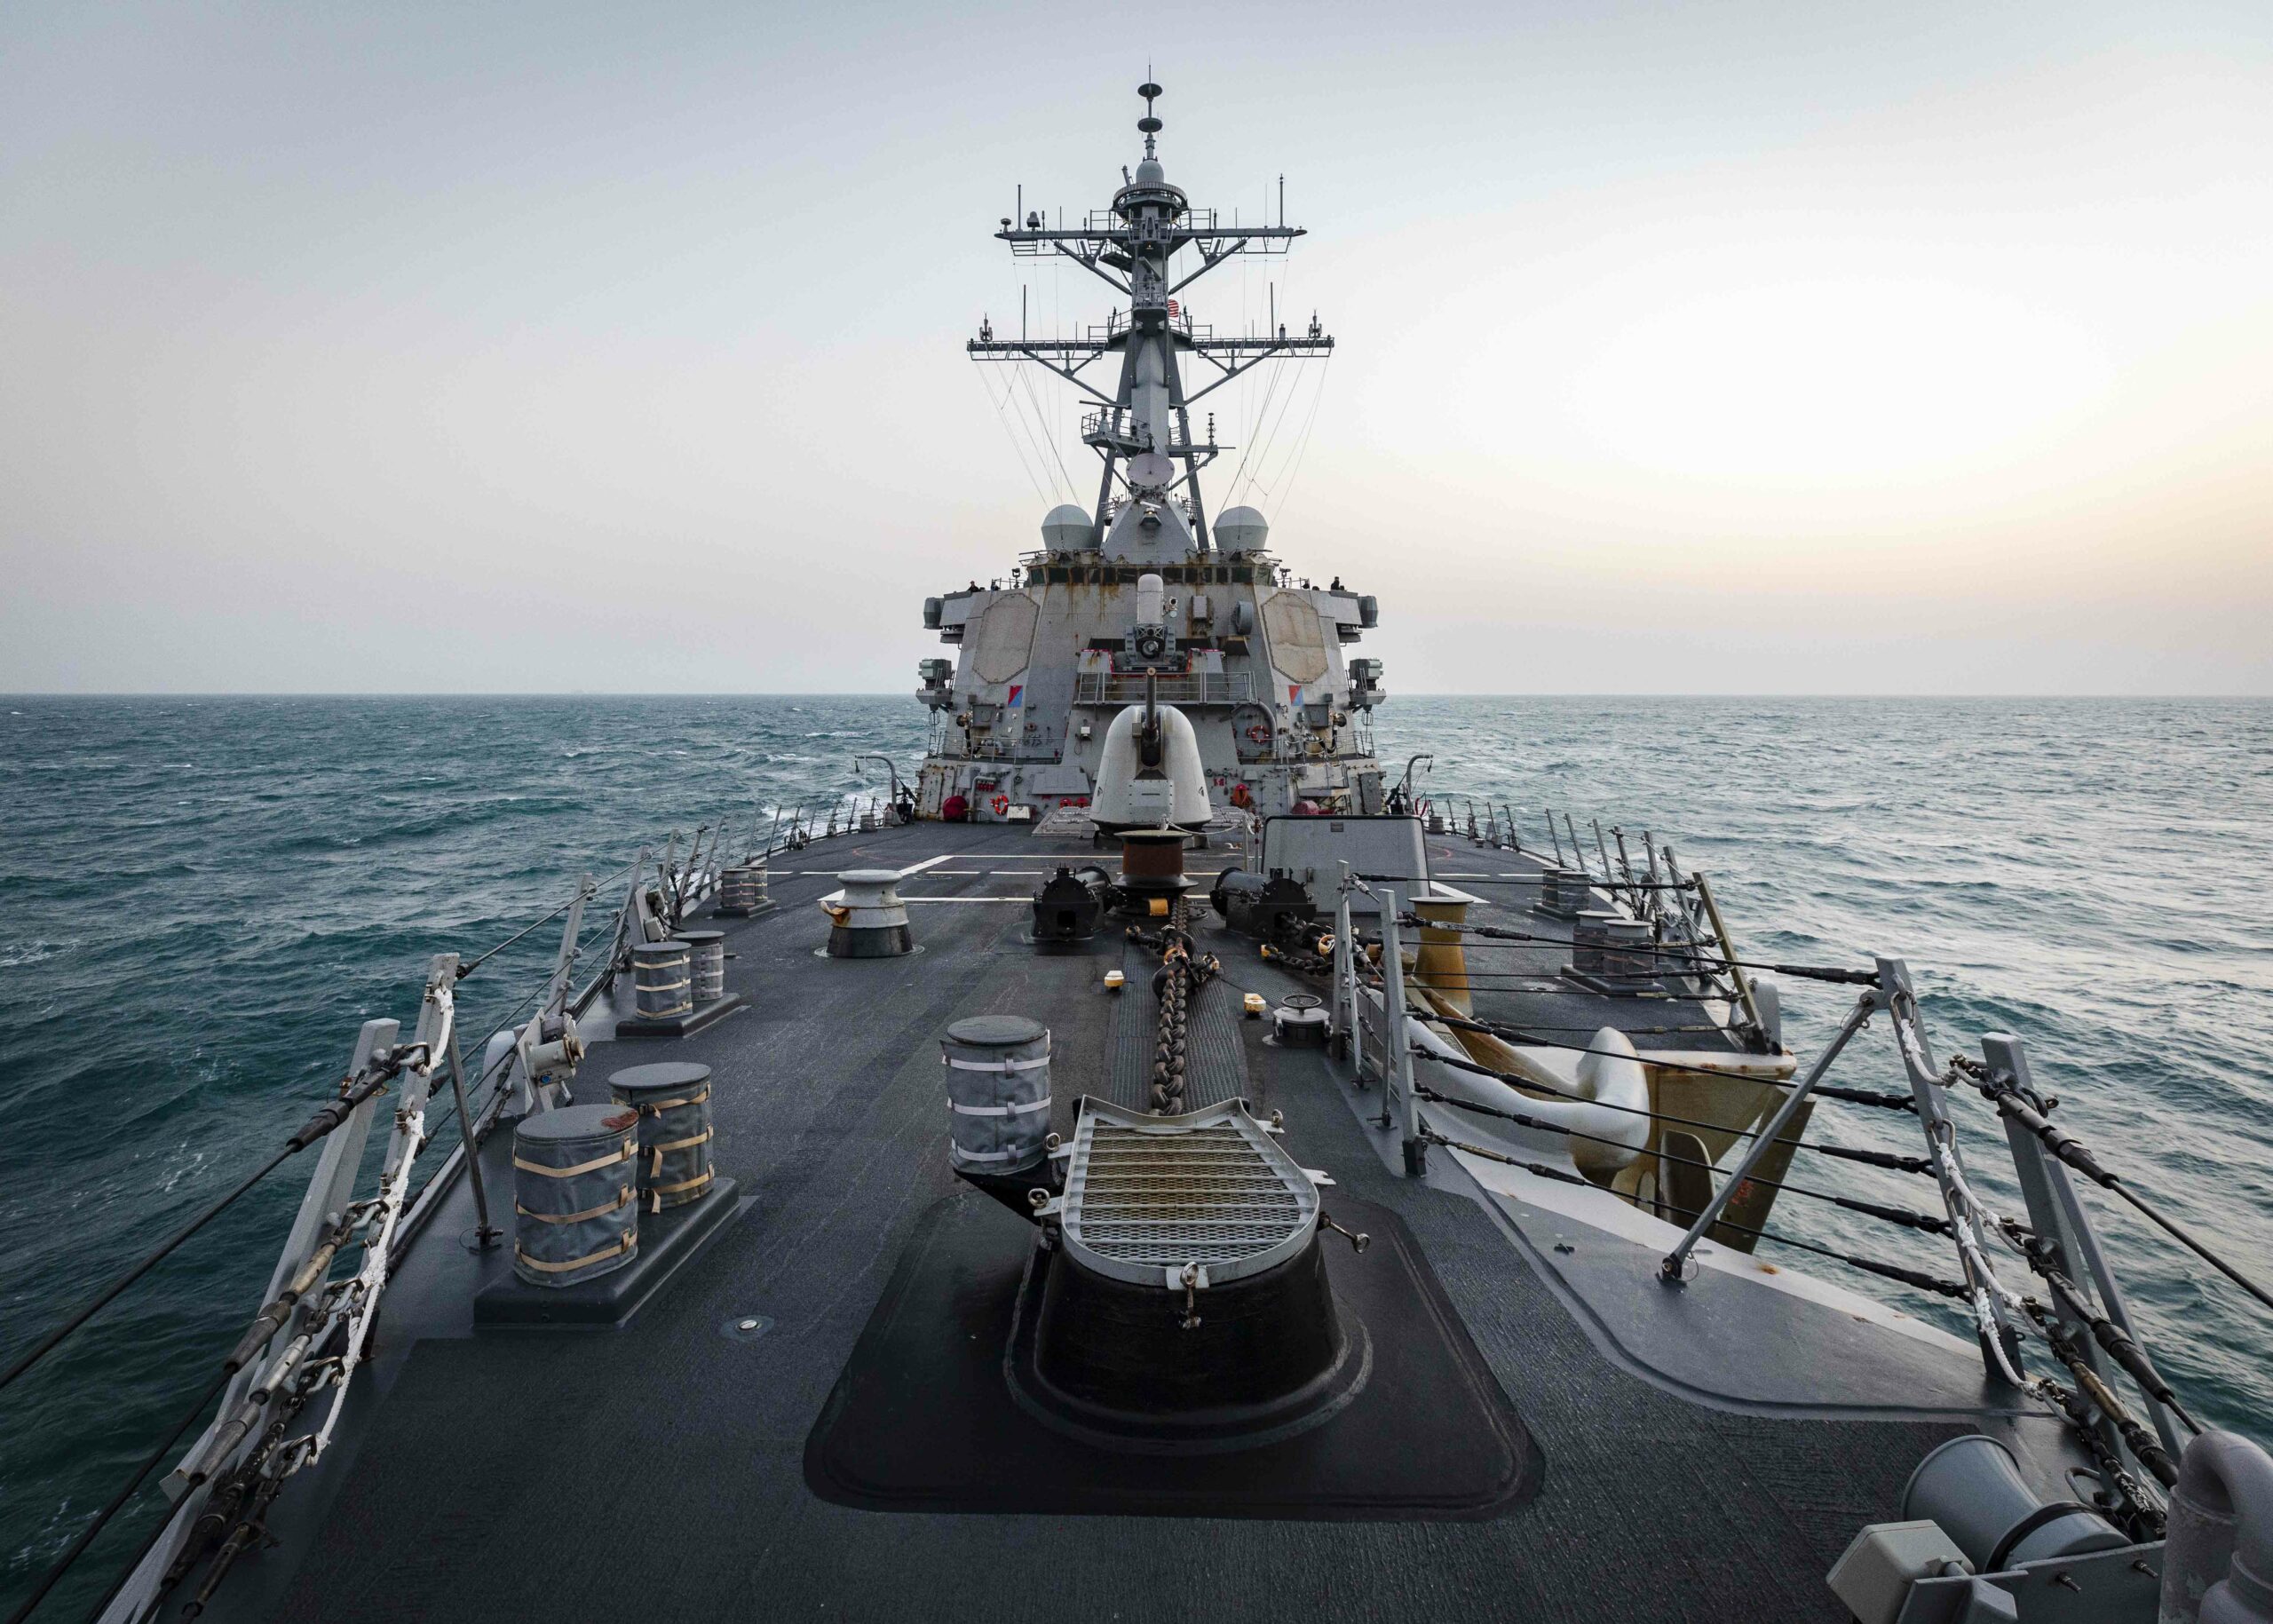 The Arleigh Burke-class guided-missile destroyer USS John S. McCain (DDG 56) is conducting routine underway operations in support of stability and security for a free and open Indo-Pacific. McCain is forward-deployed to the U.S. 7th Fleet area of operations in support of security and stability in the Indo-Pacific region.